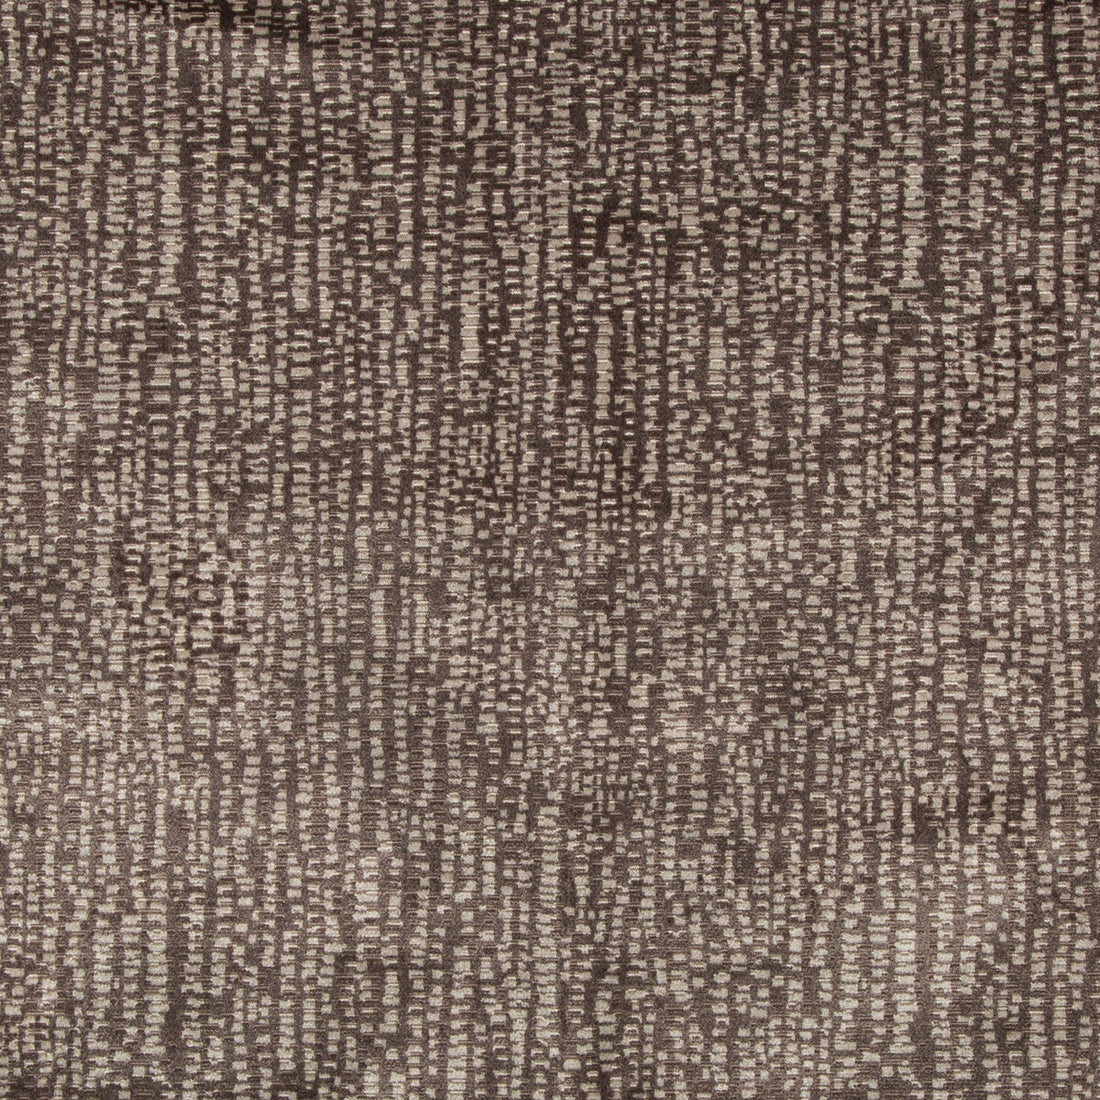 Stepping Stones fabric in mink color - pattern 34788.6.0 - by Kravet Couture in the Artisan Velvets collection